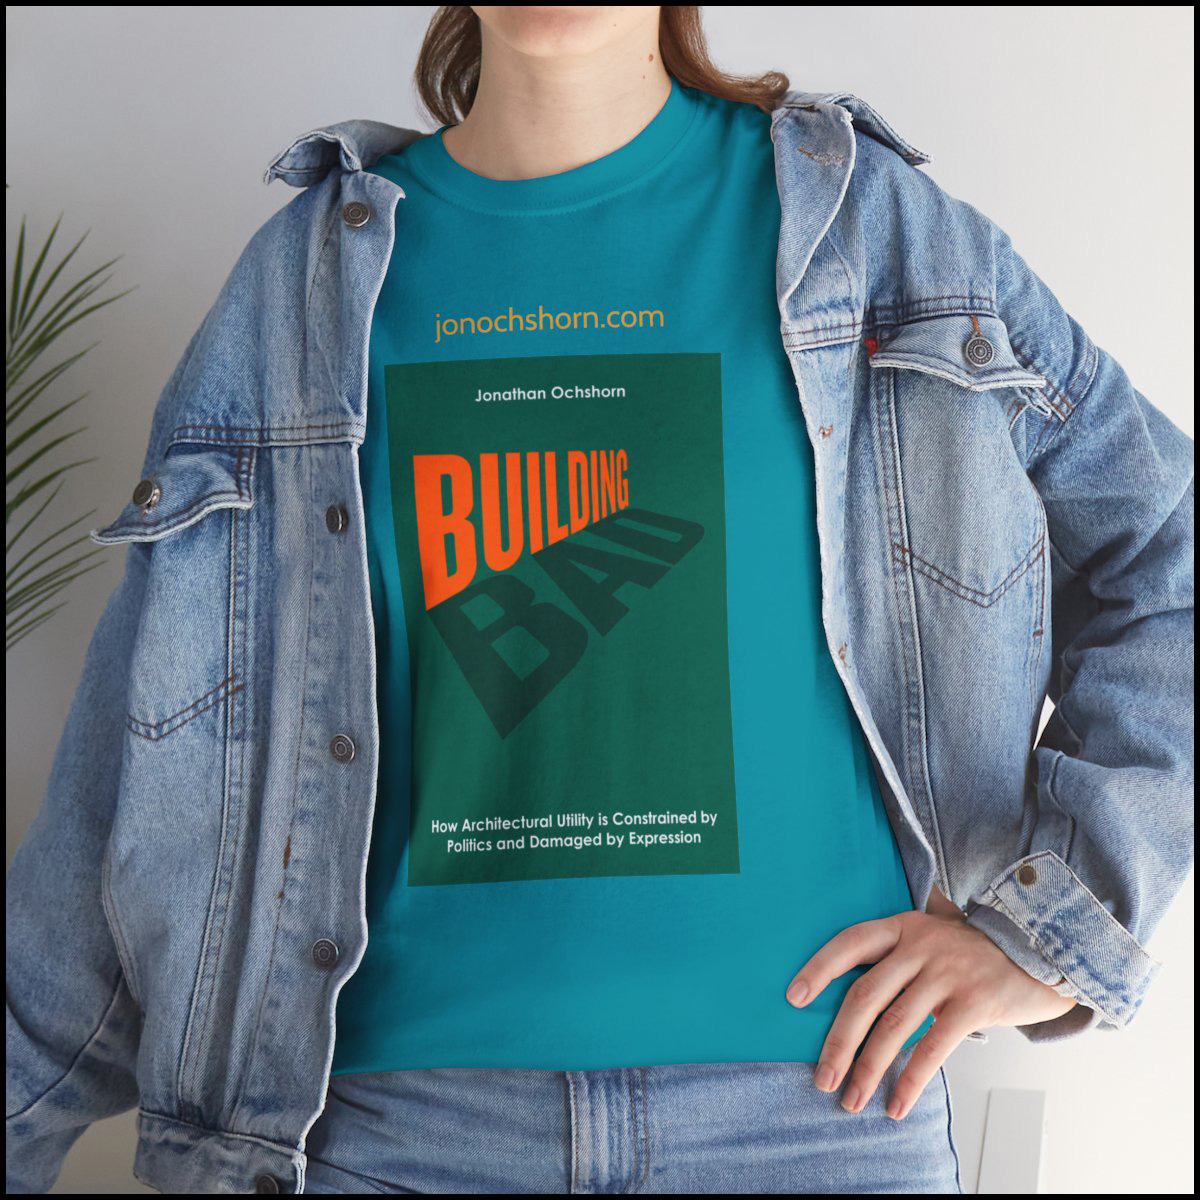 T-shirt design with Building Bad book cover